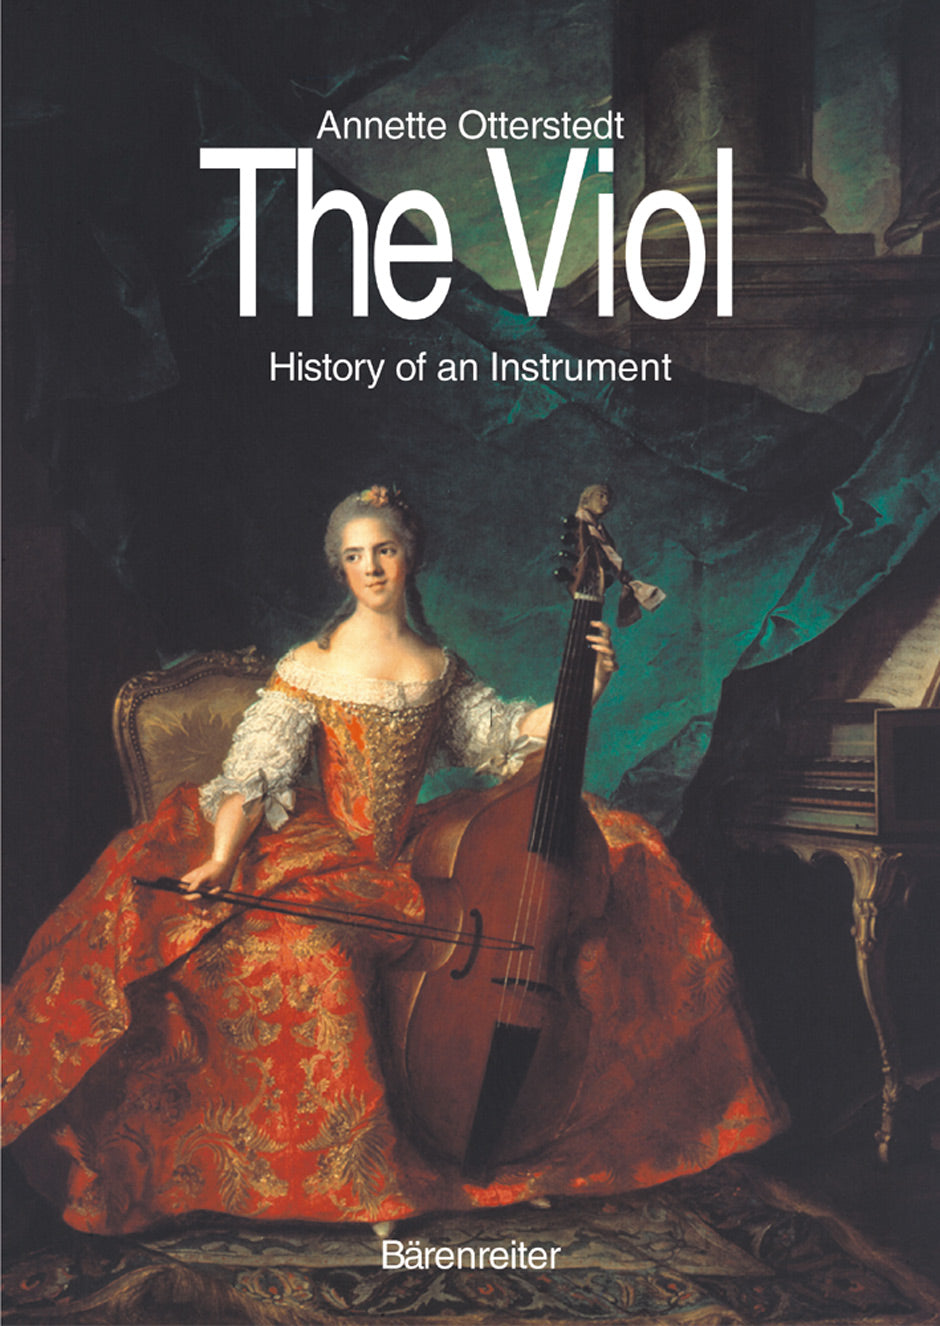 The Viol: History of an Instrument